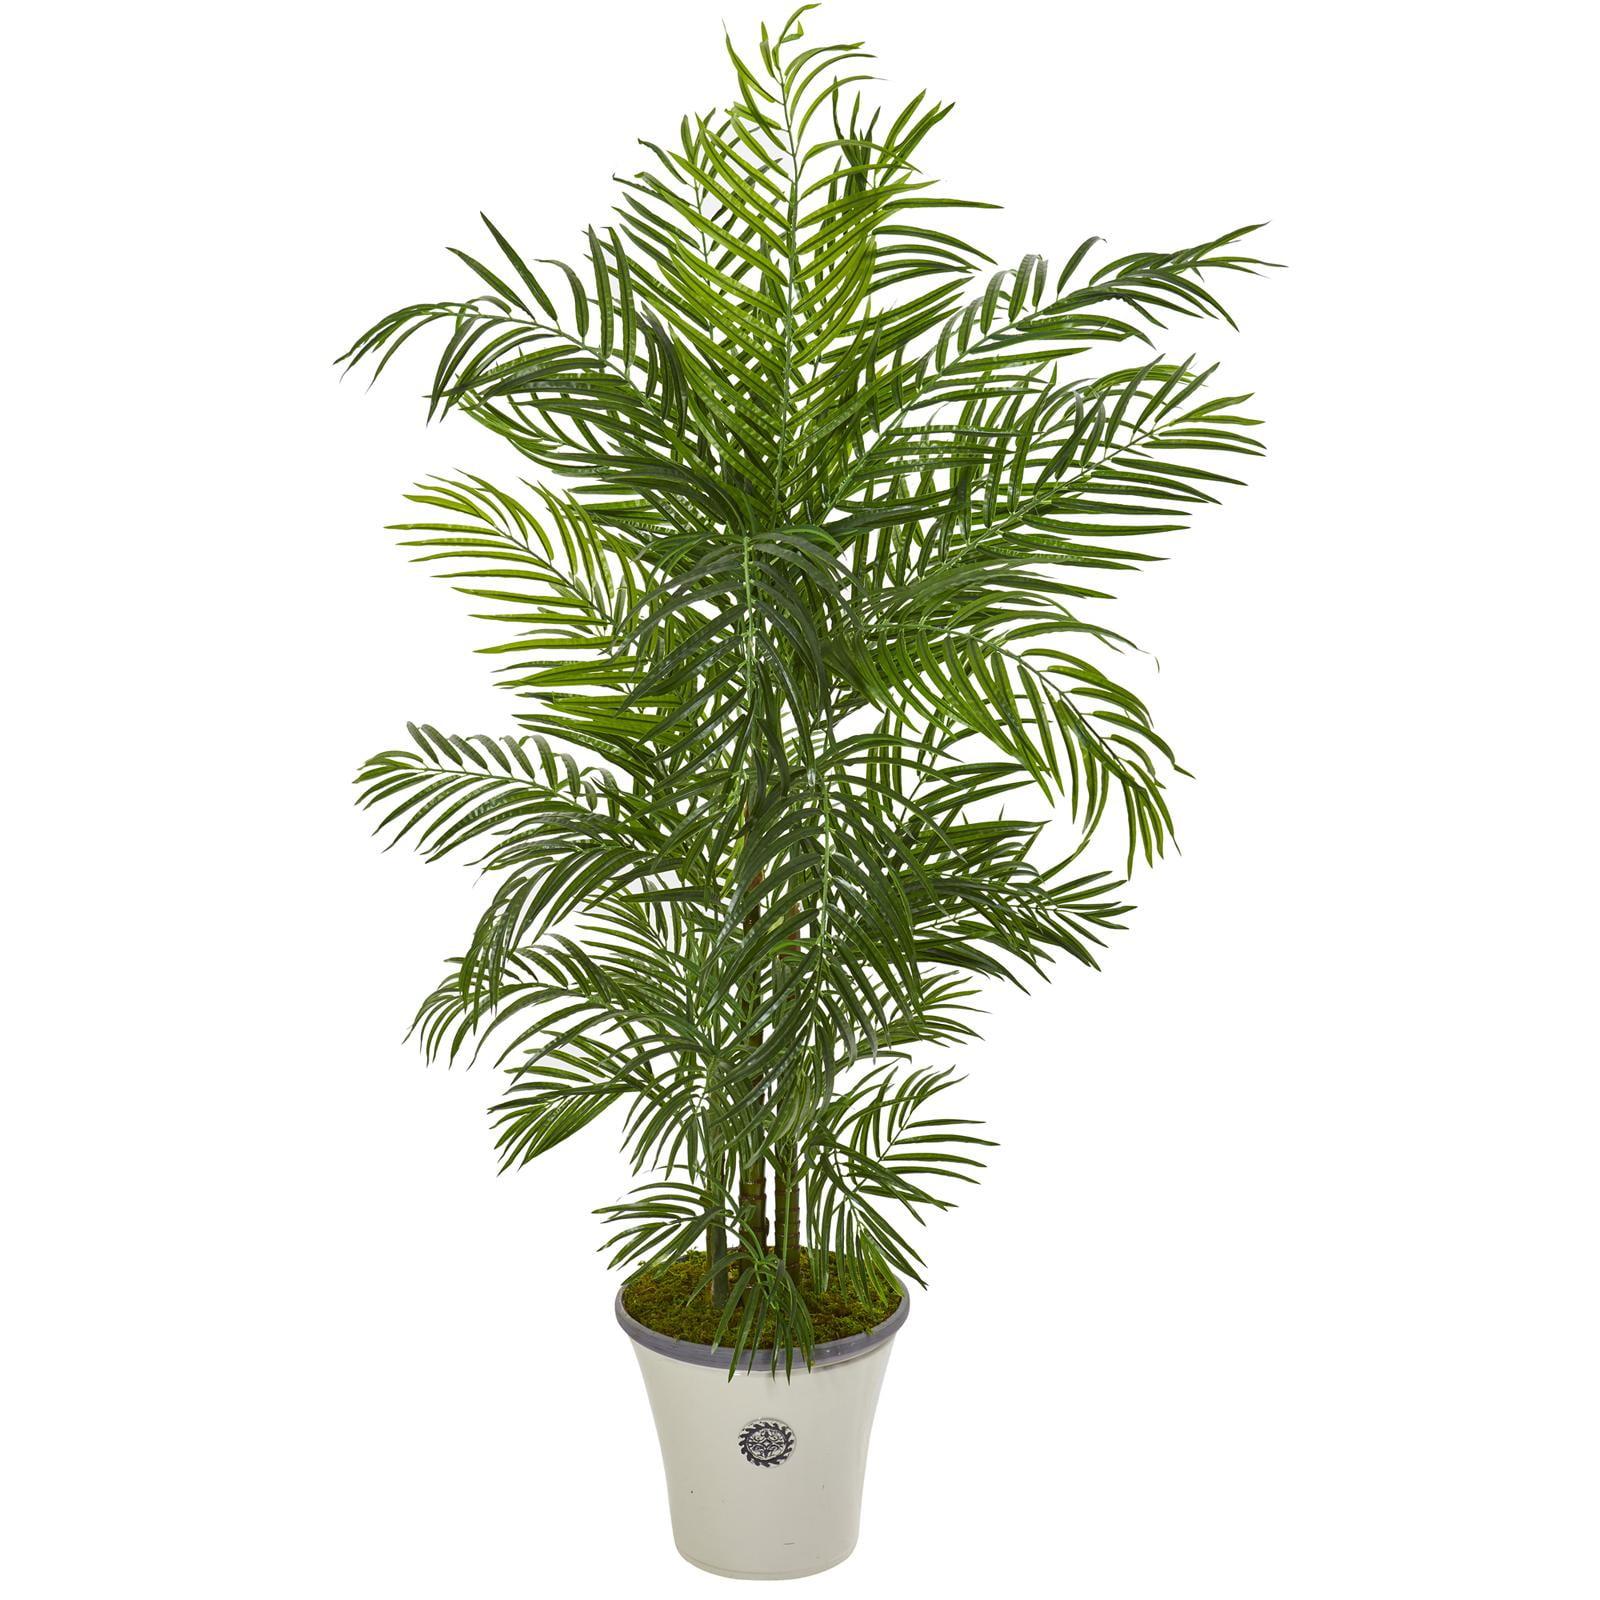 Tropical Elegance 6ft Silk Areca Palm in Off-White Planter